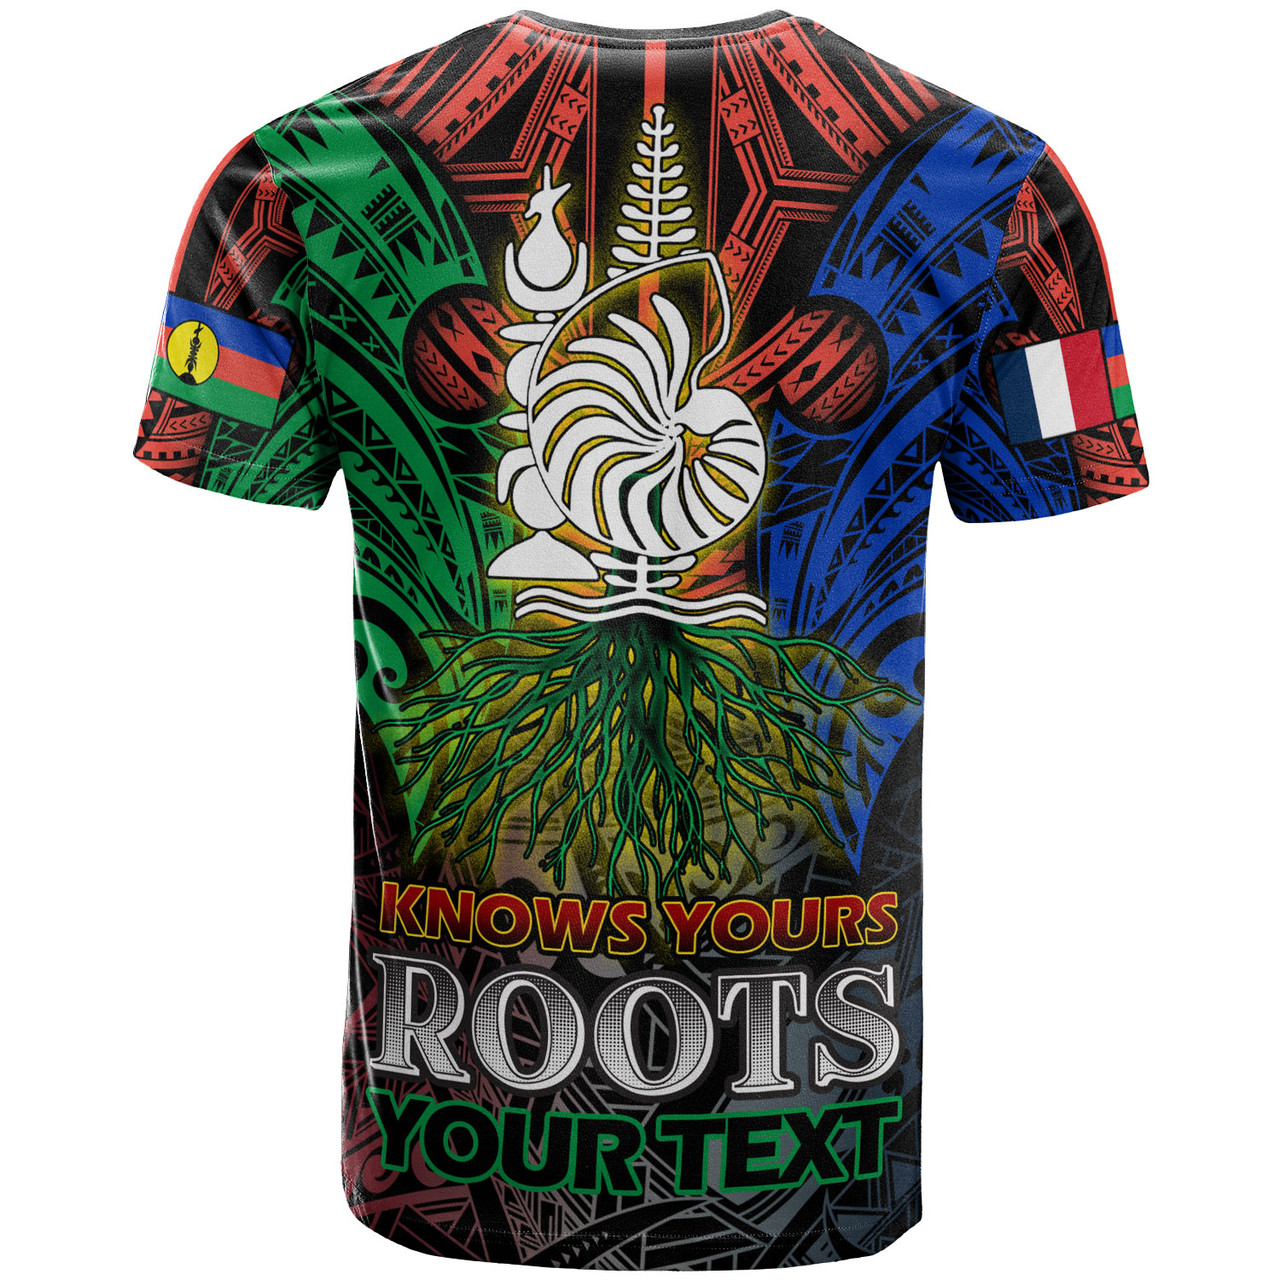 New Caledonia T-Shirt - Custom New Caledonia KNOWS YOURS ROOTS T-Shirt